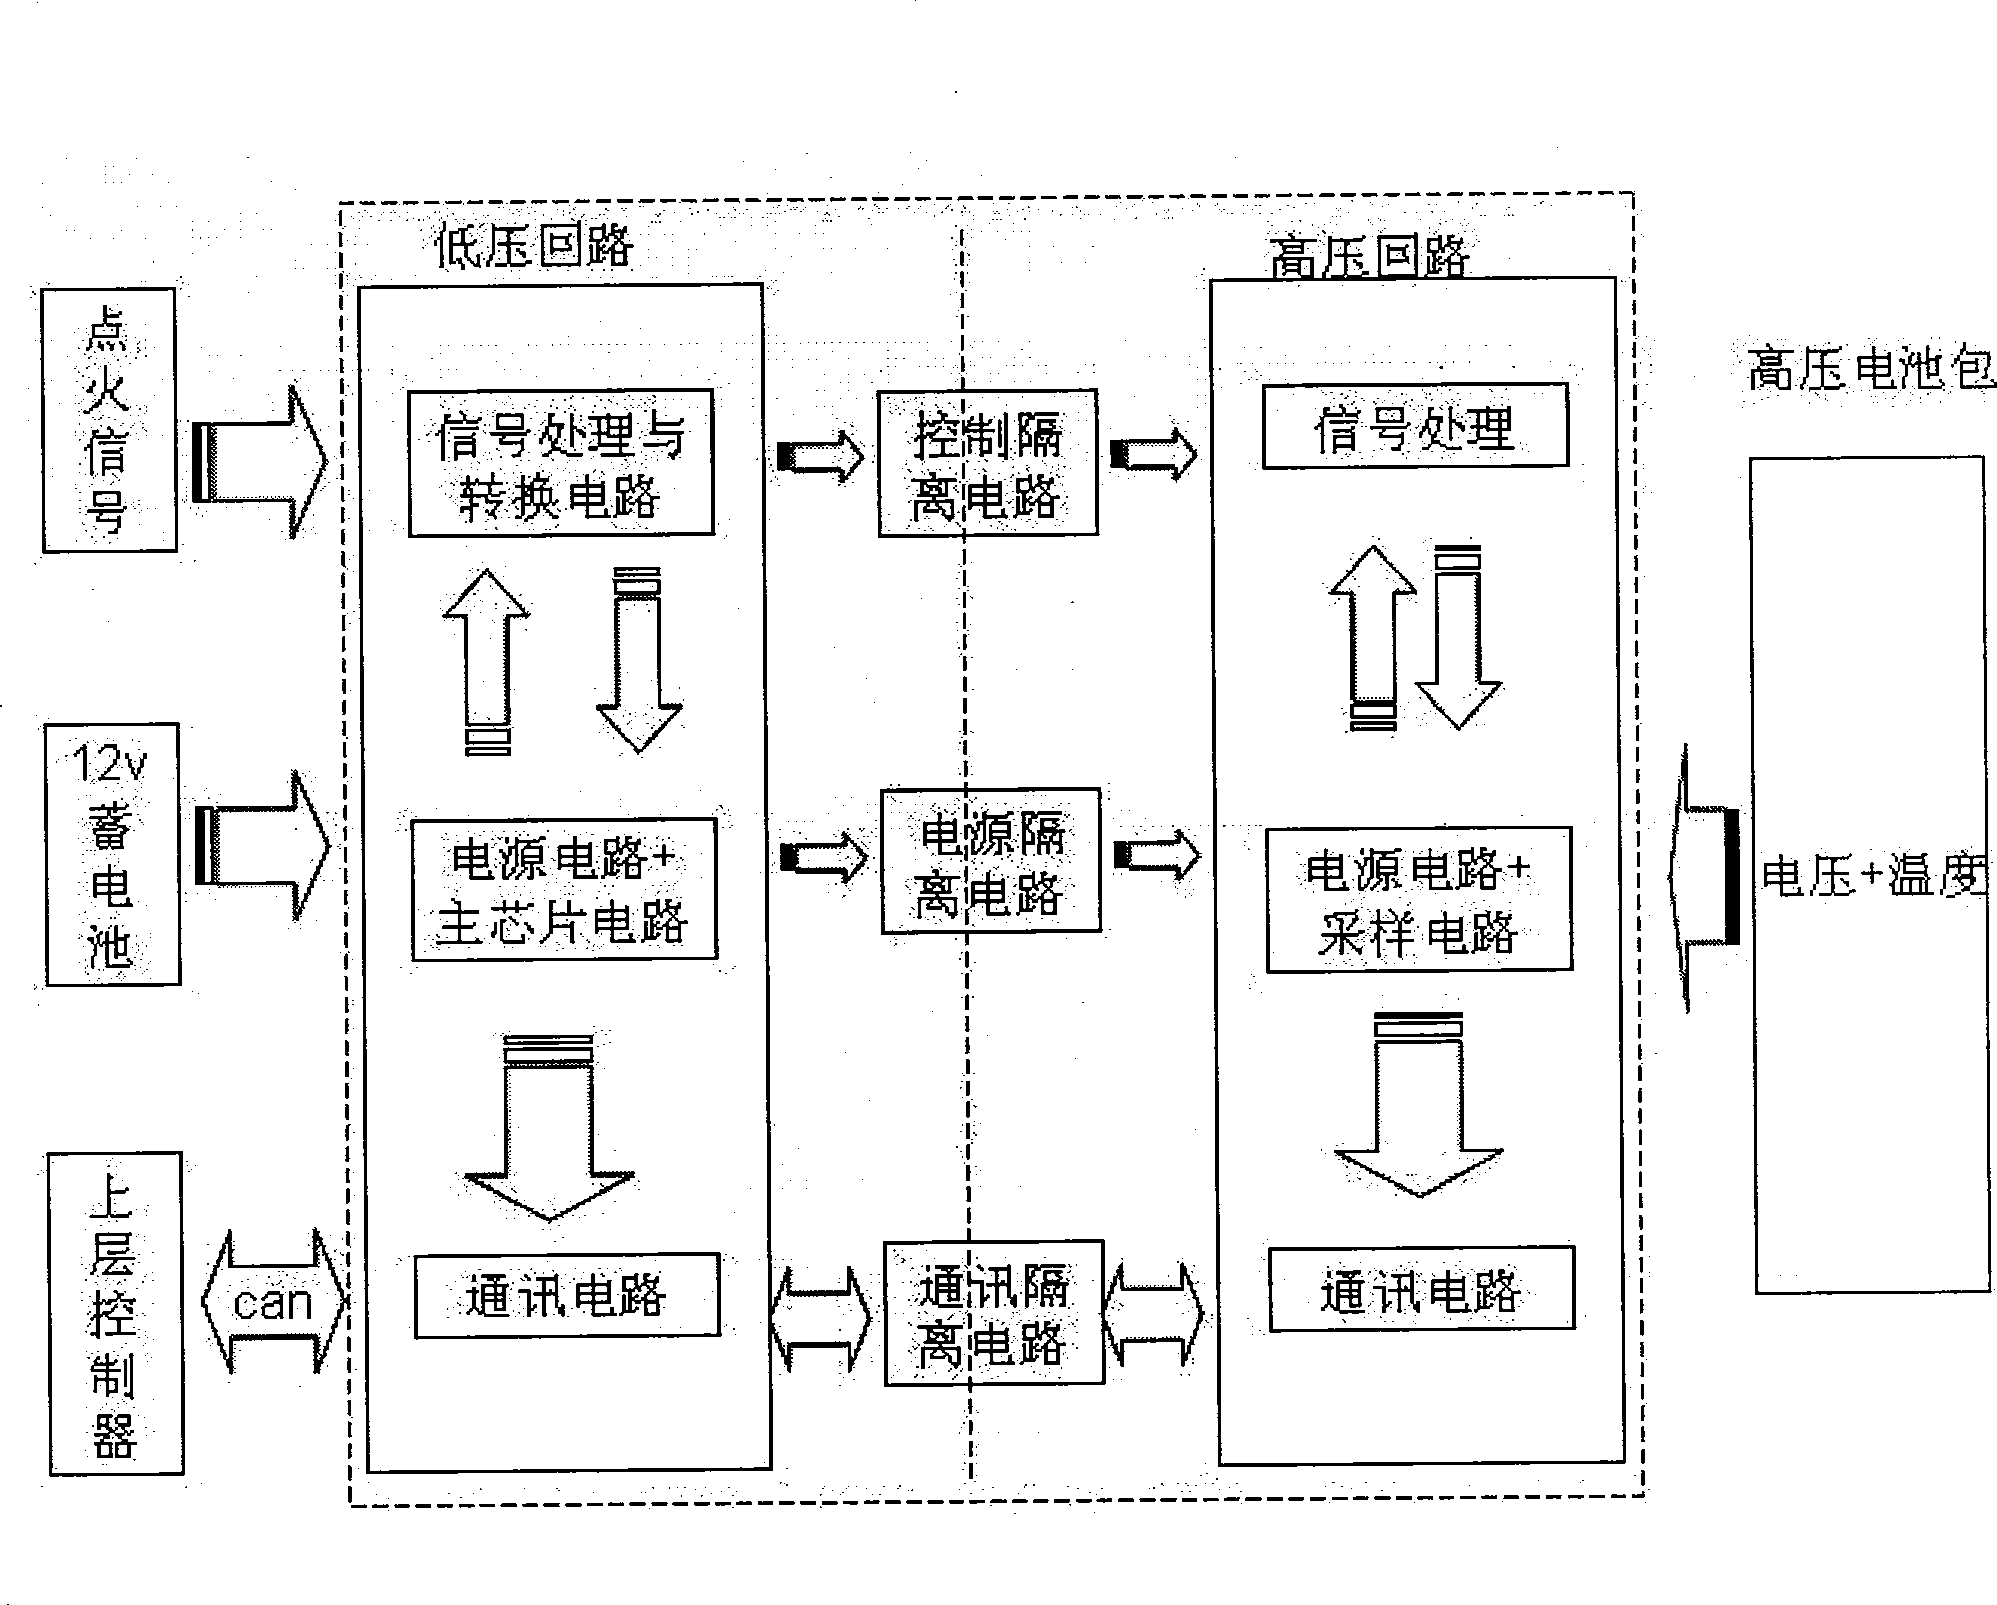 Monitoring device and monitoring methods for distributed battery management system